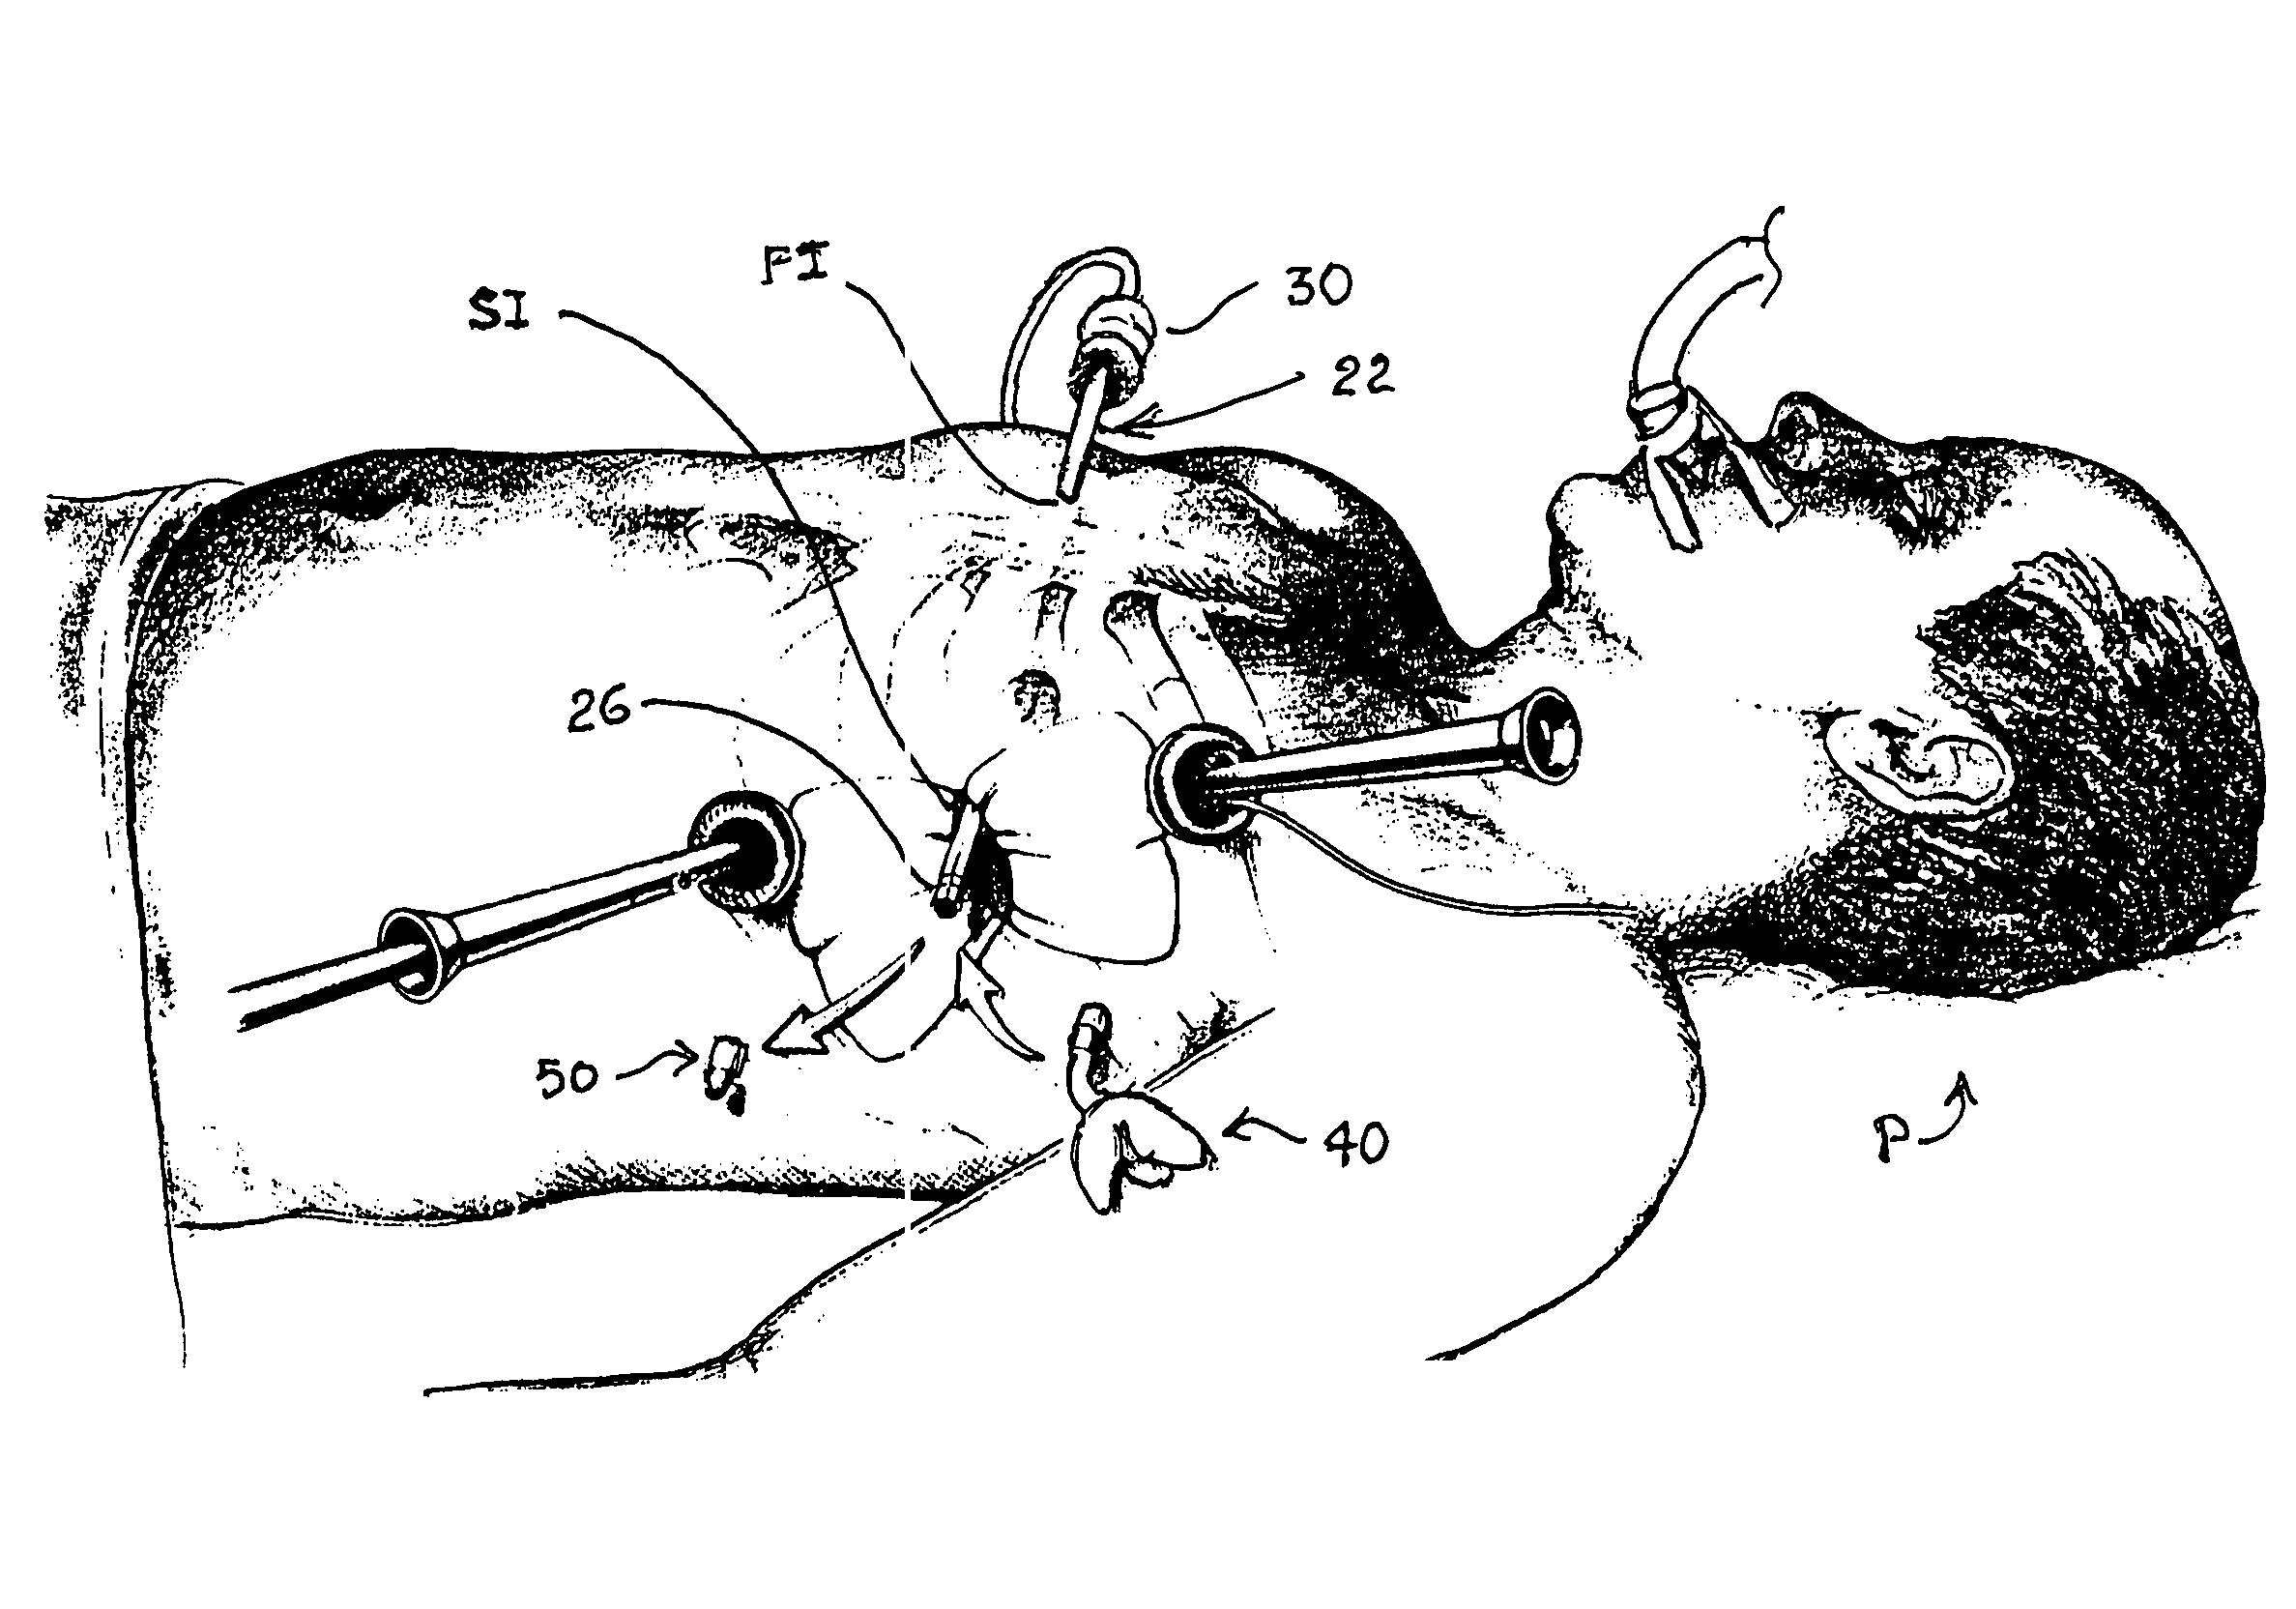 Methods and apparatus providing suction-assisted tissue engagement through a minimally invasive incision